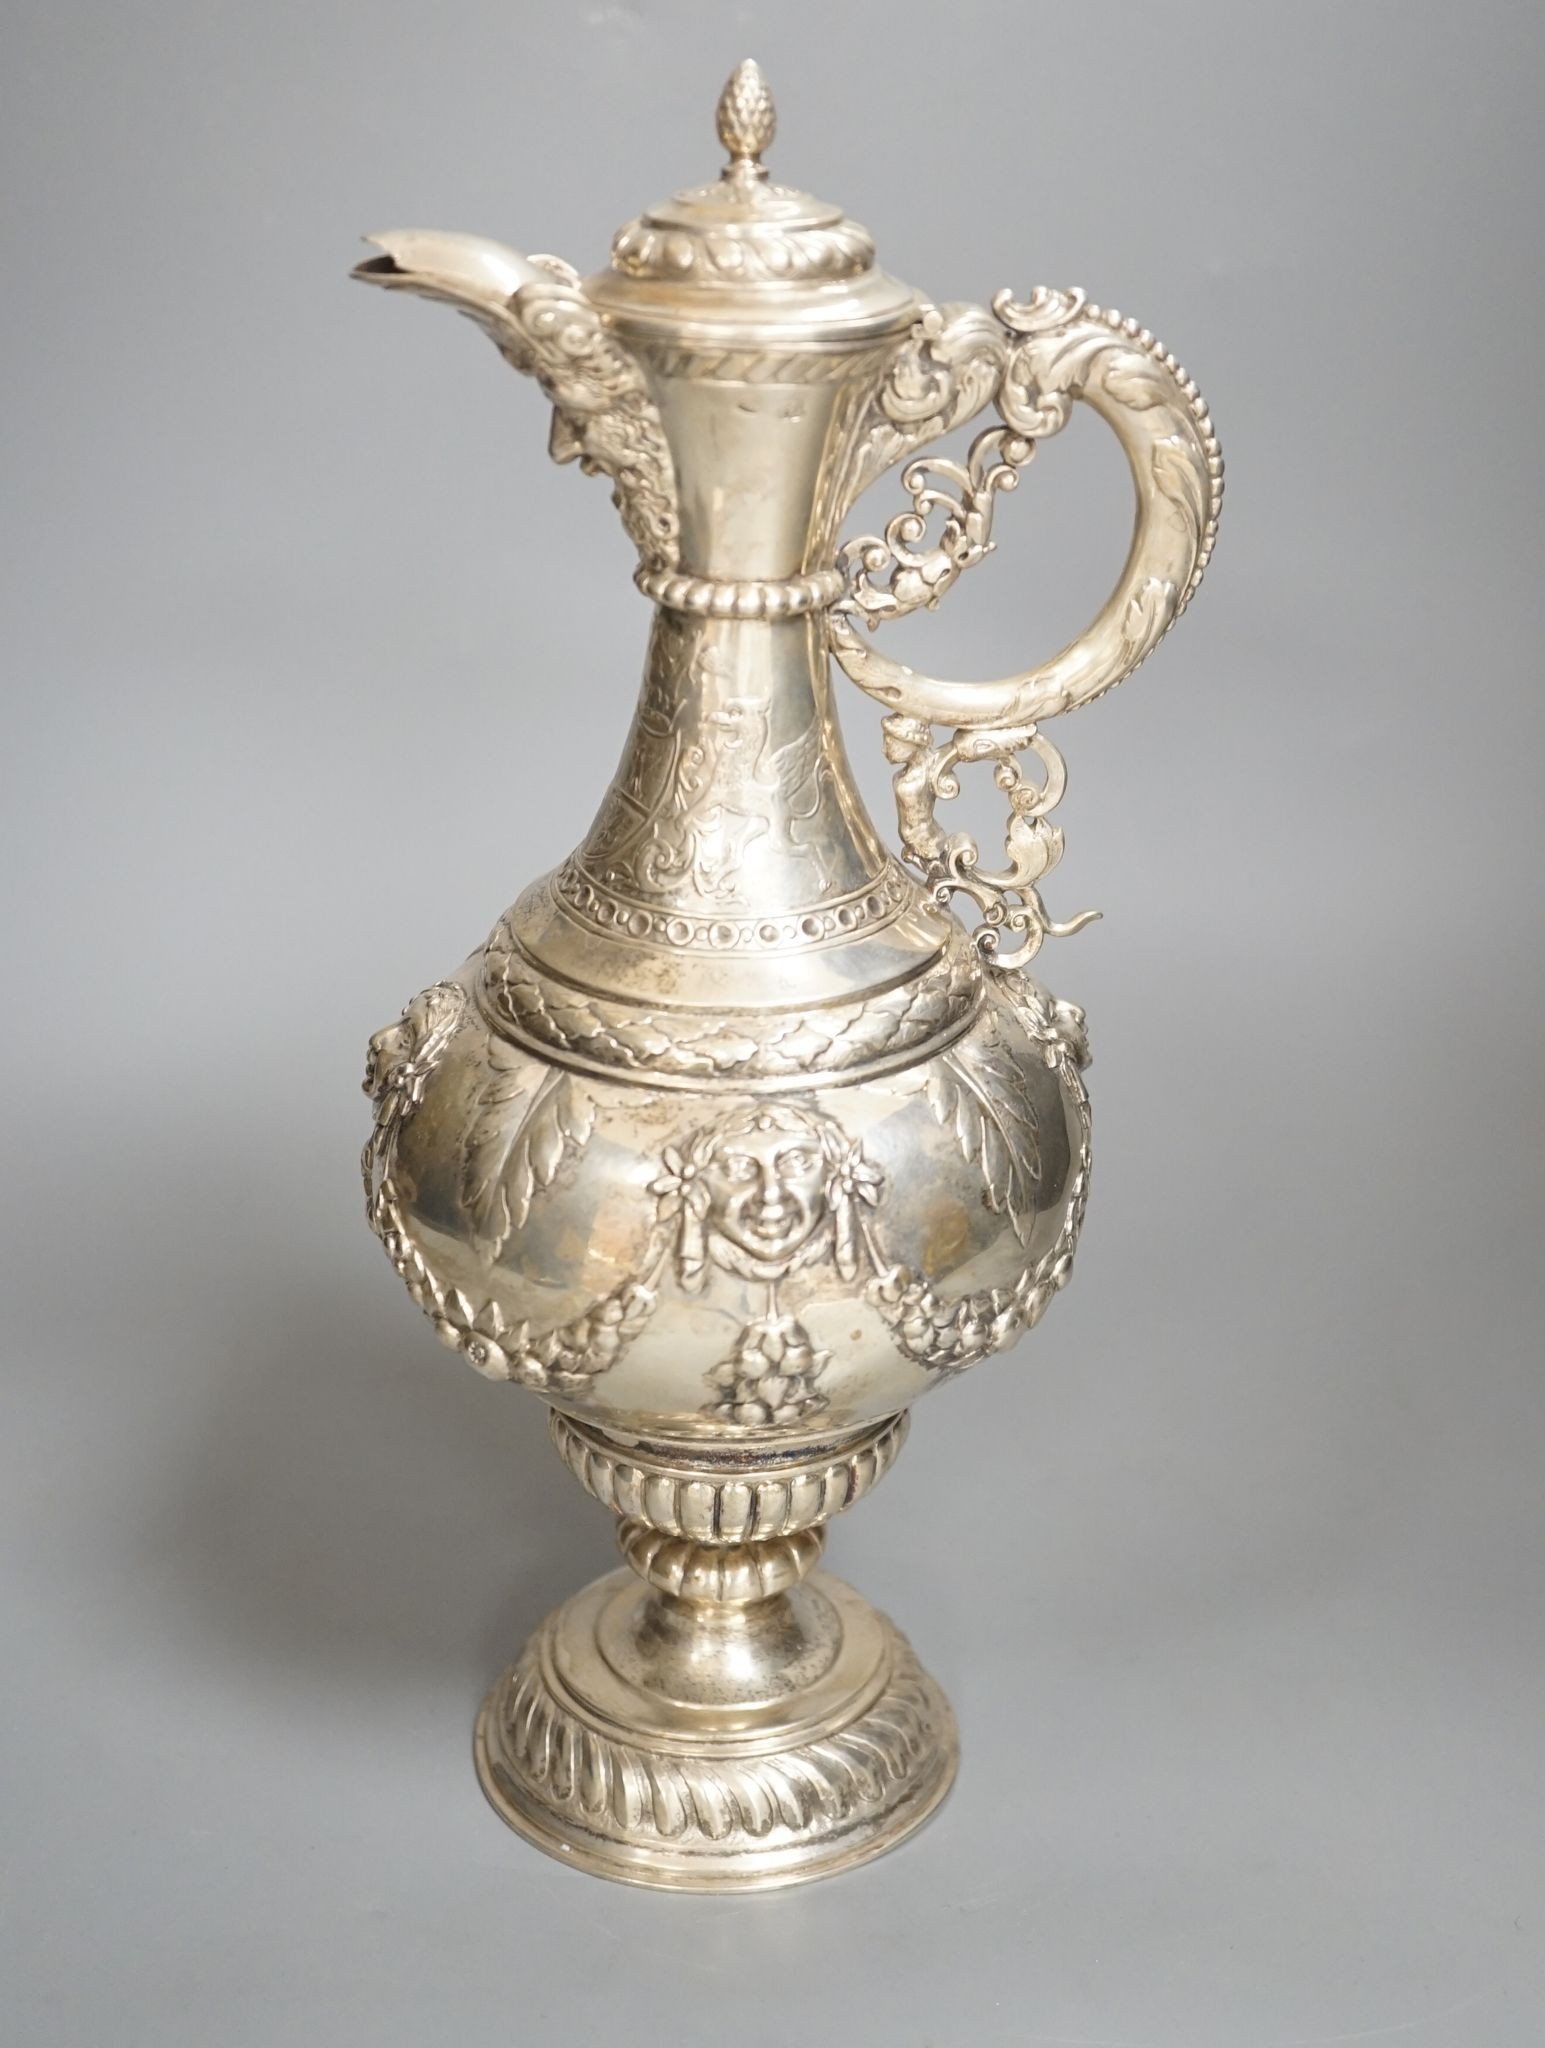 A 19th century Continental white metal wine ewer, embossed with swags and masks, height 29.9cm, 16.5oz.